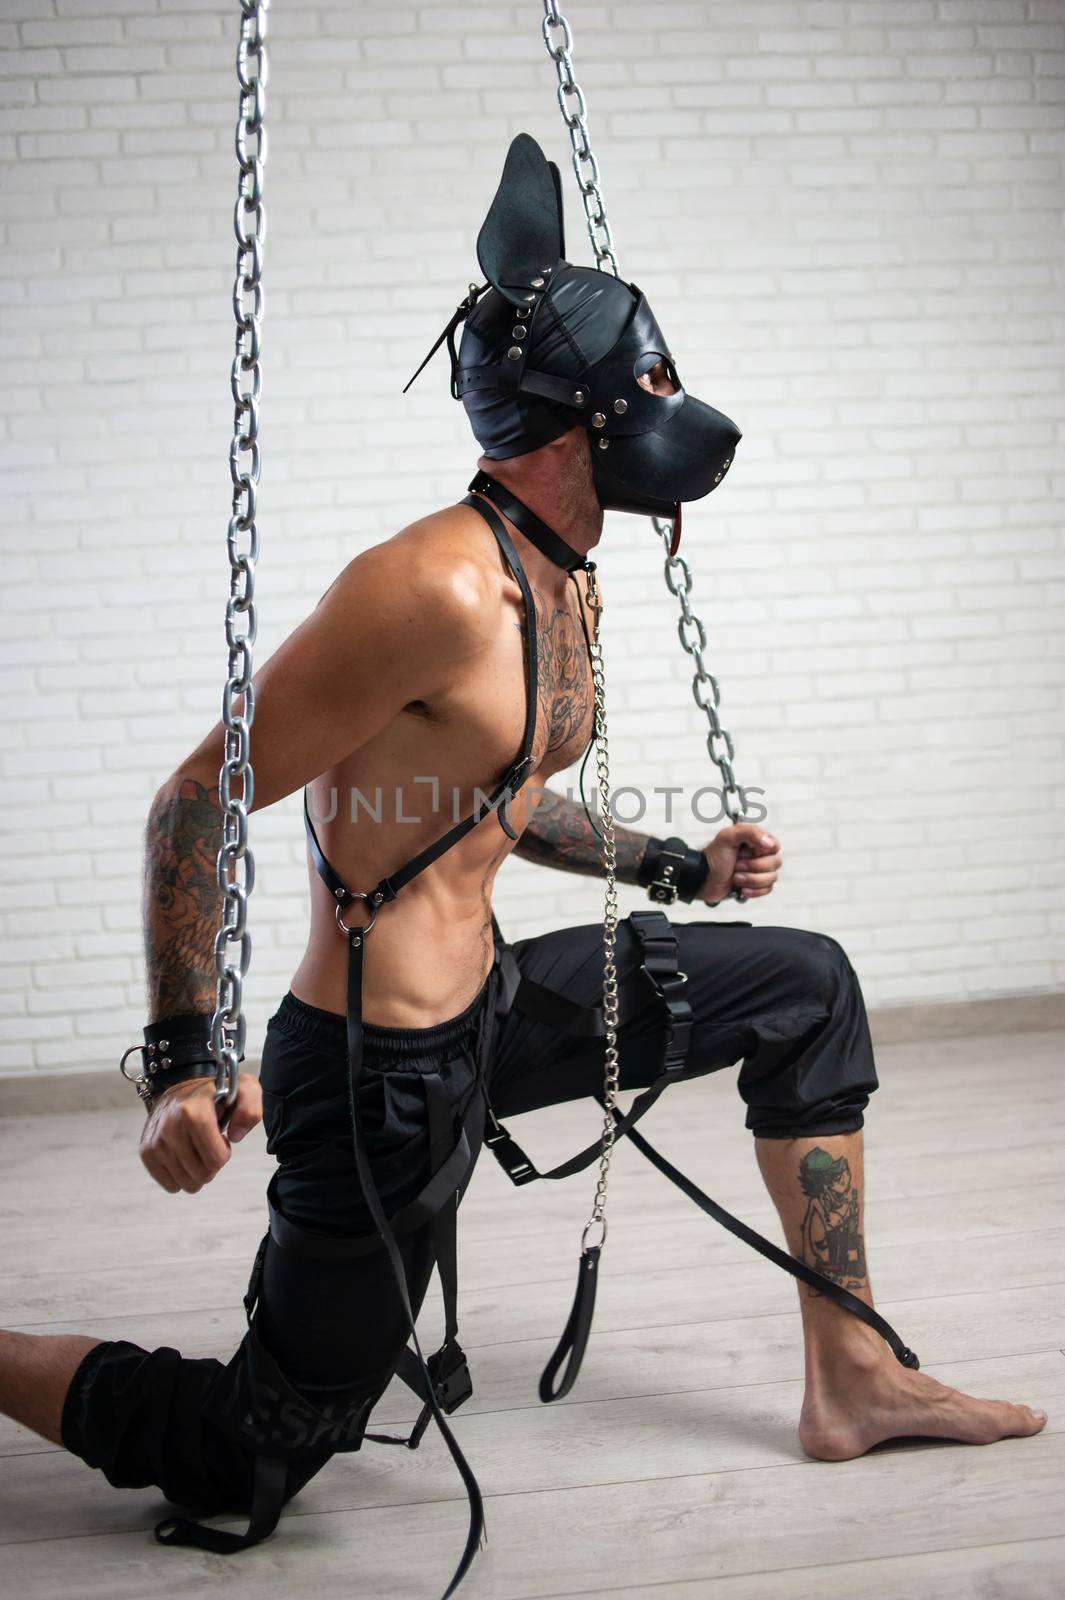 the man in a leather bdsm mask of a dog handcuffed to chains is kneeling against the wall